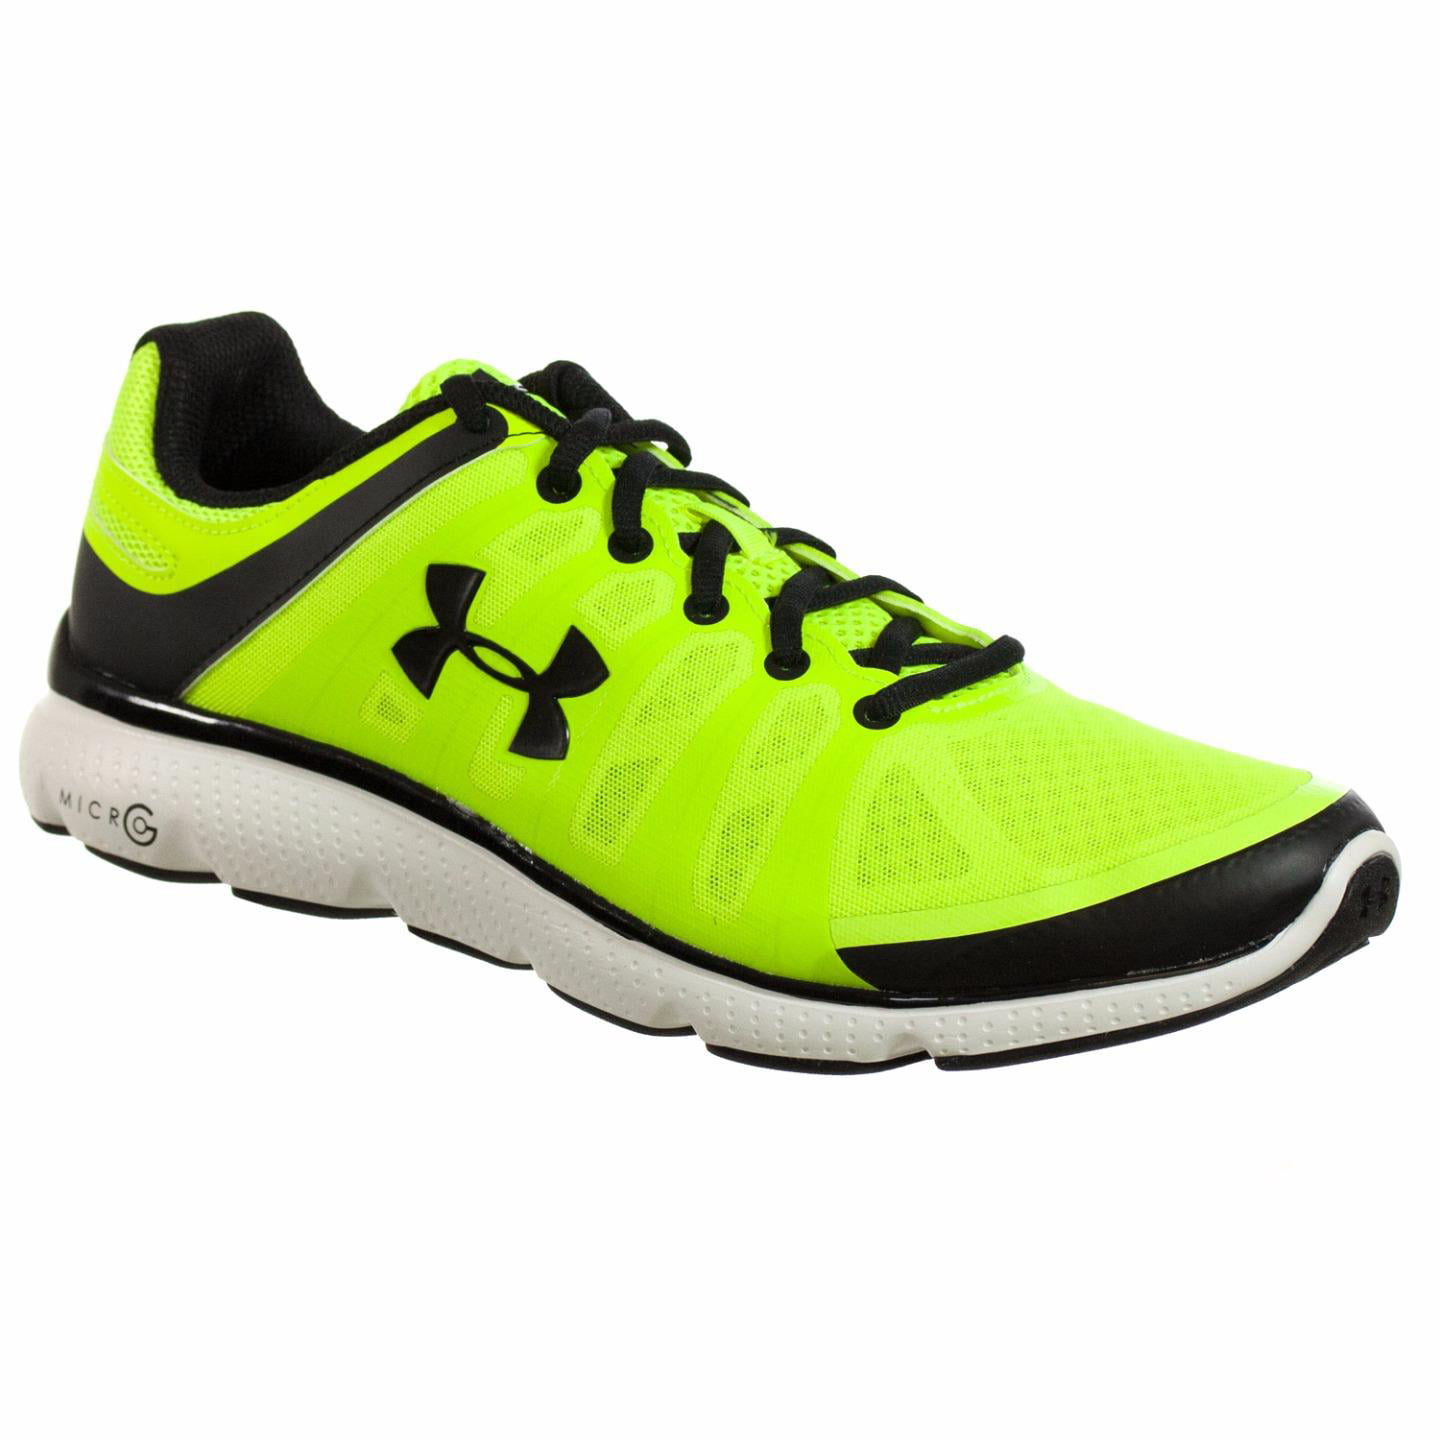 1246703-001 Mens Under Armour Micro G Pulse TR II Running Shoe 